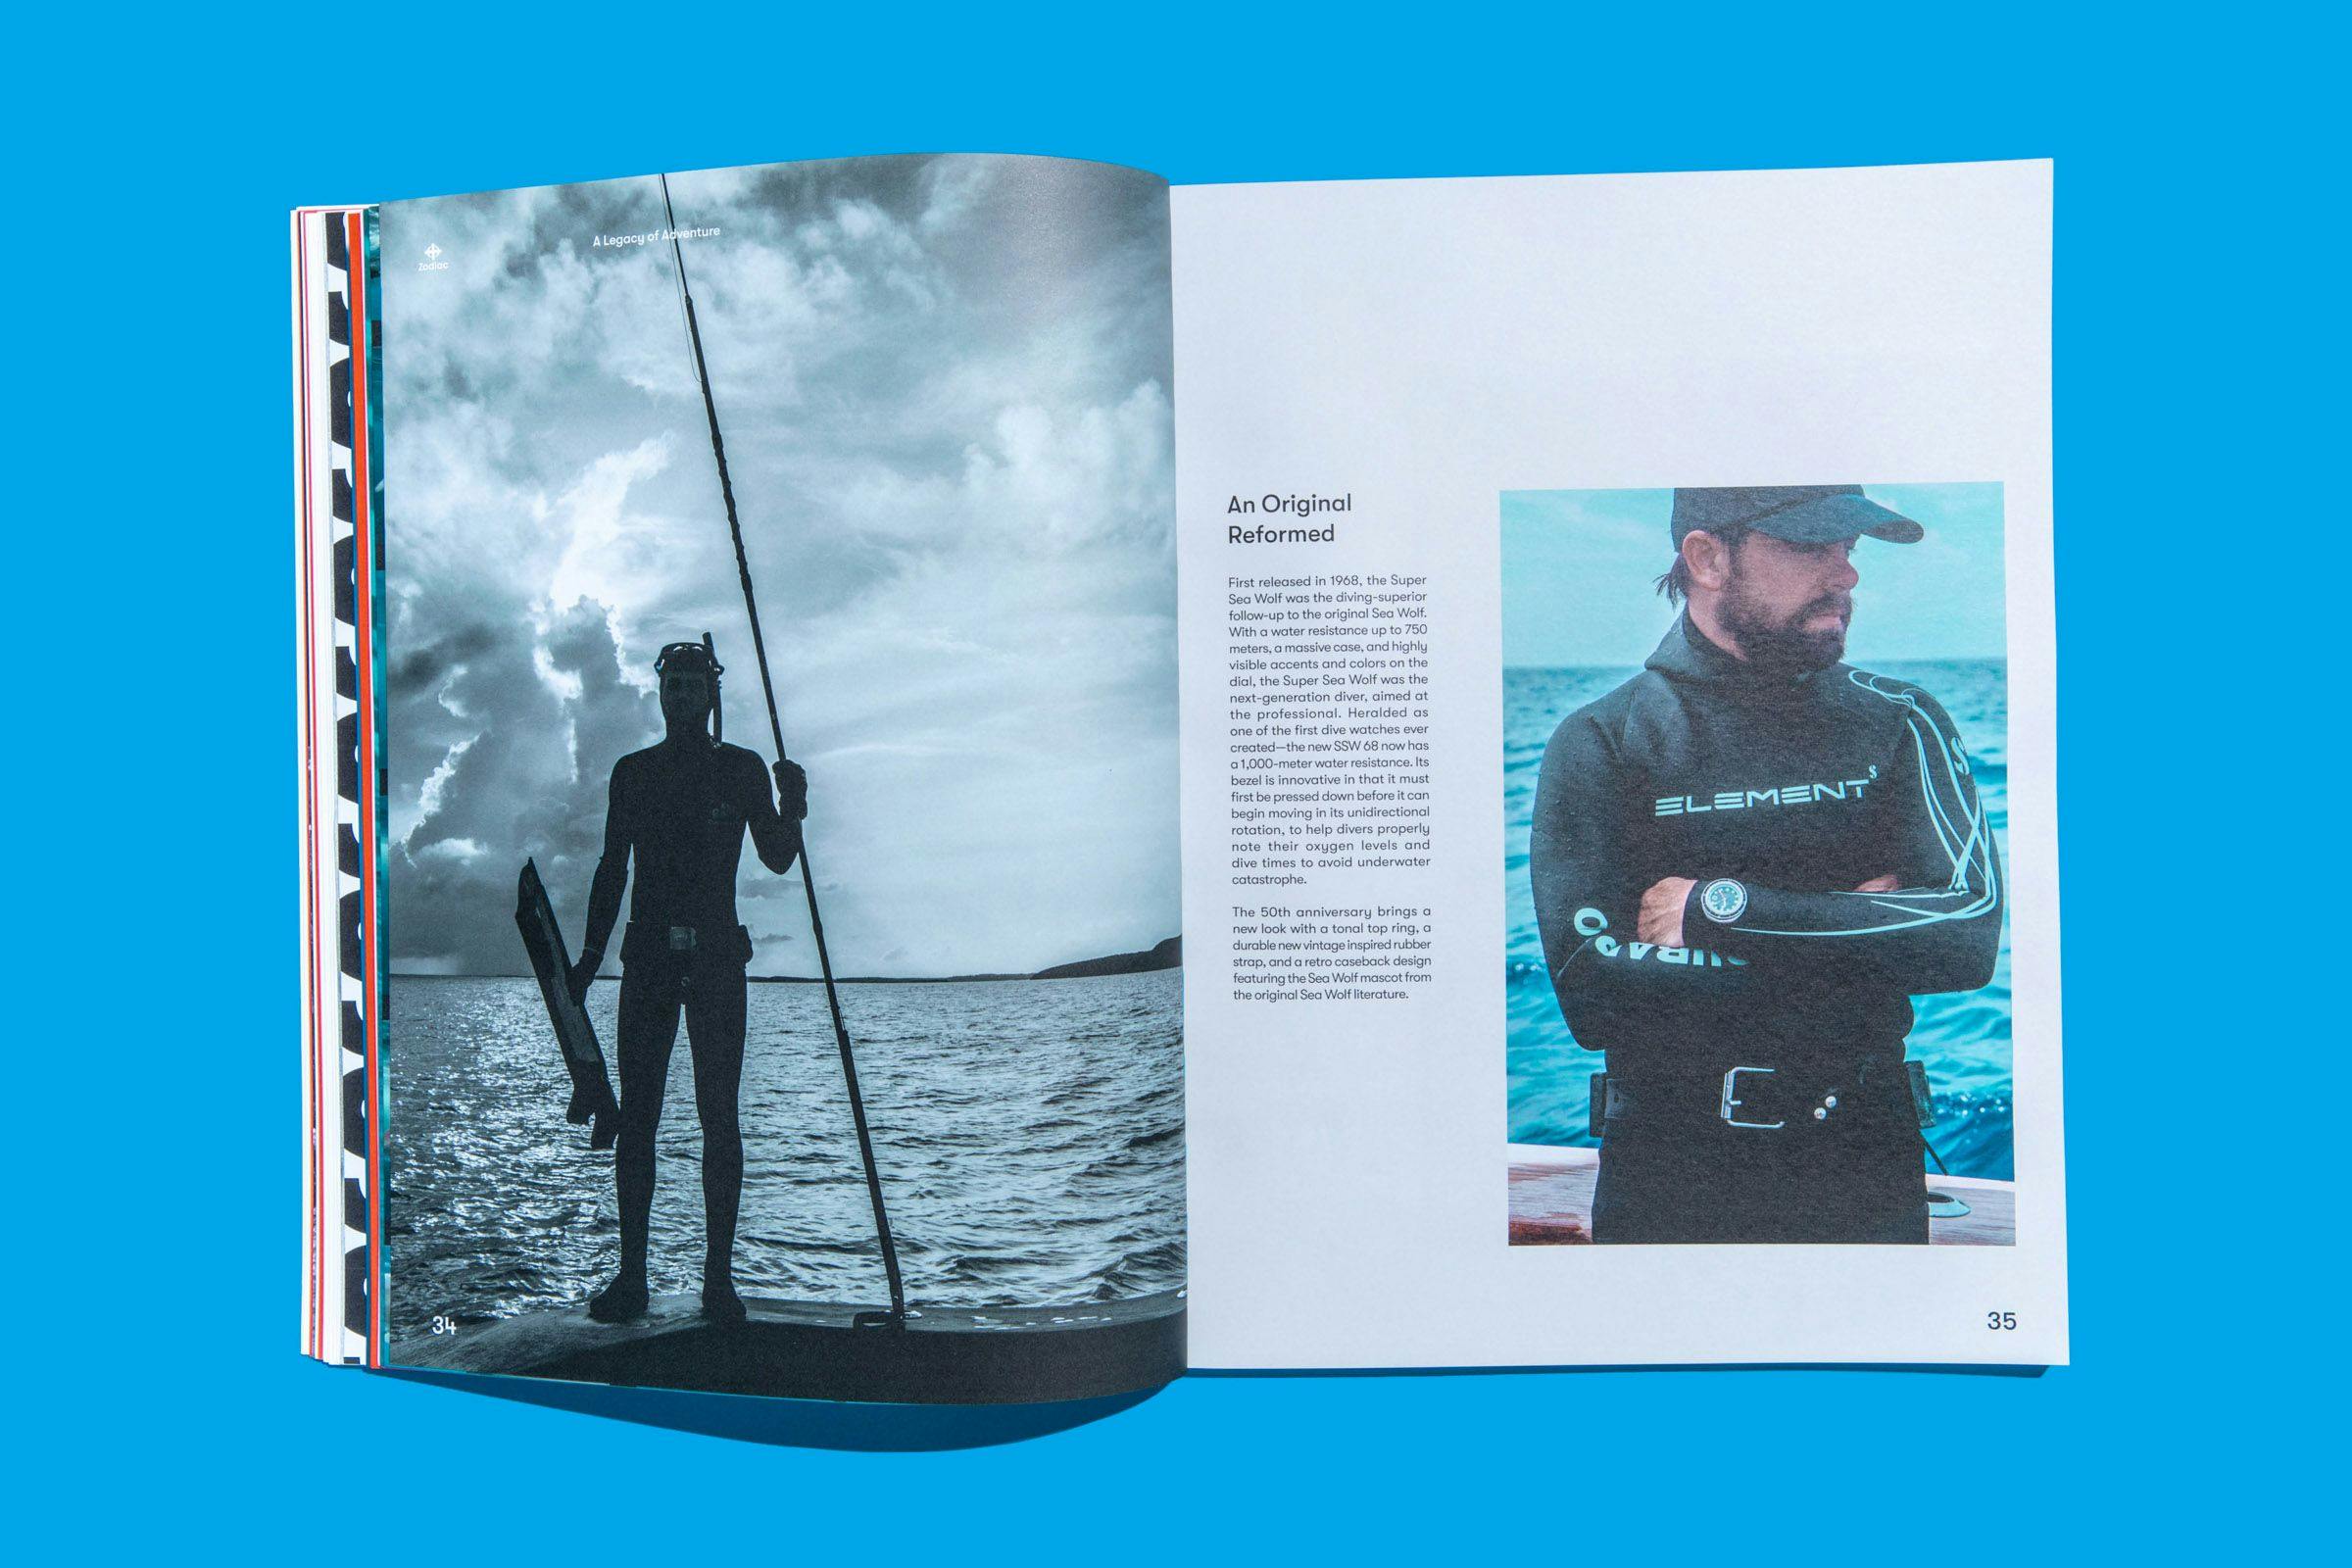 Pages from the Zodiac Watches: Brand Book with photos of divers near the ocean